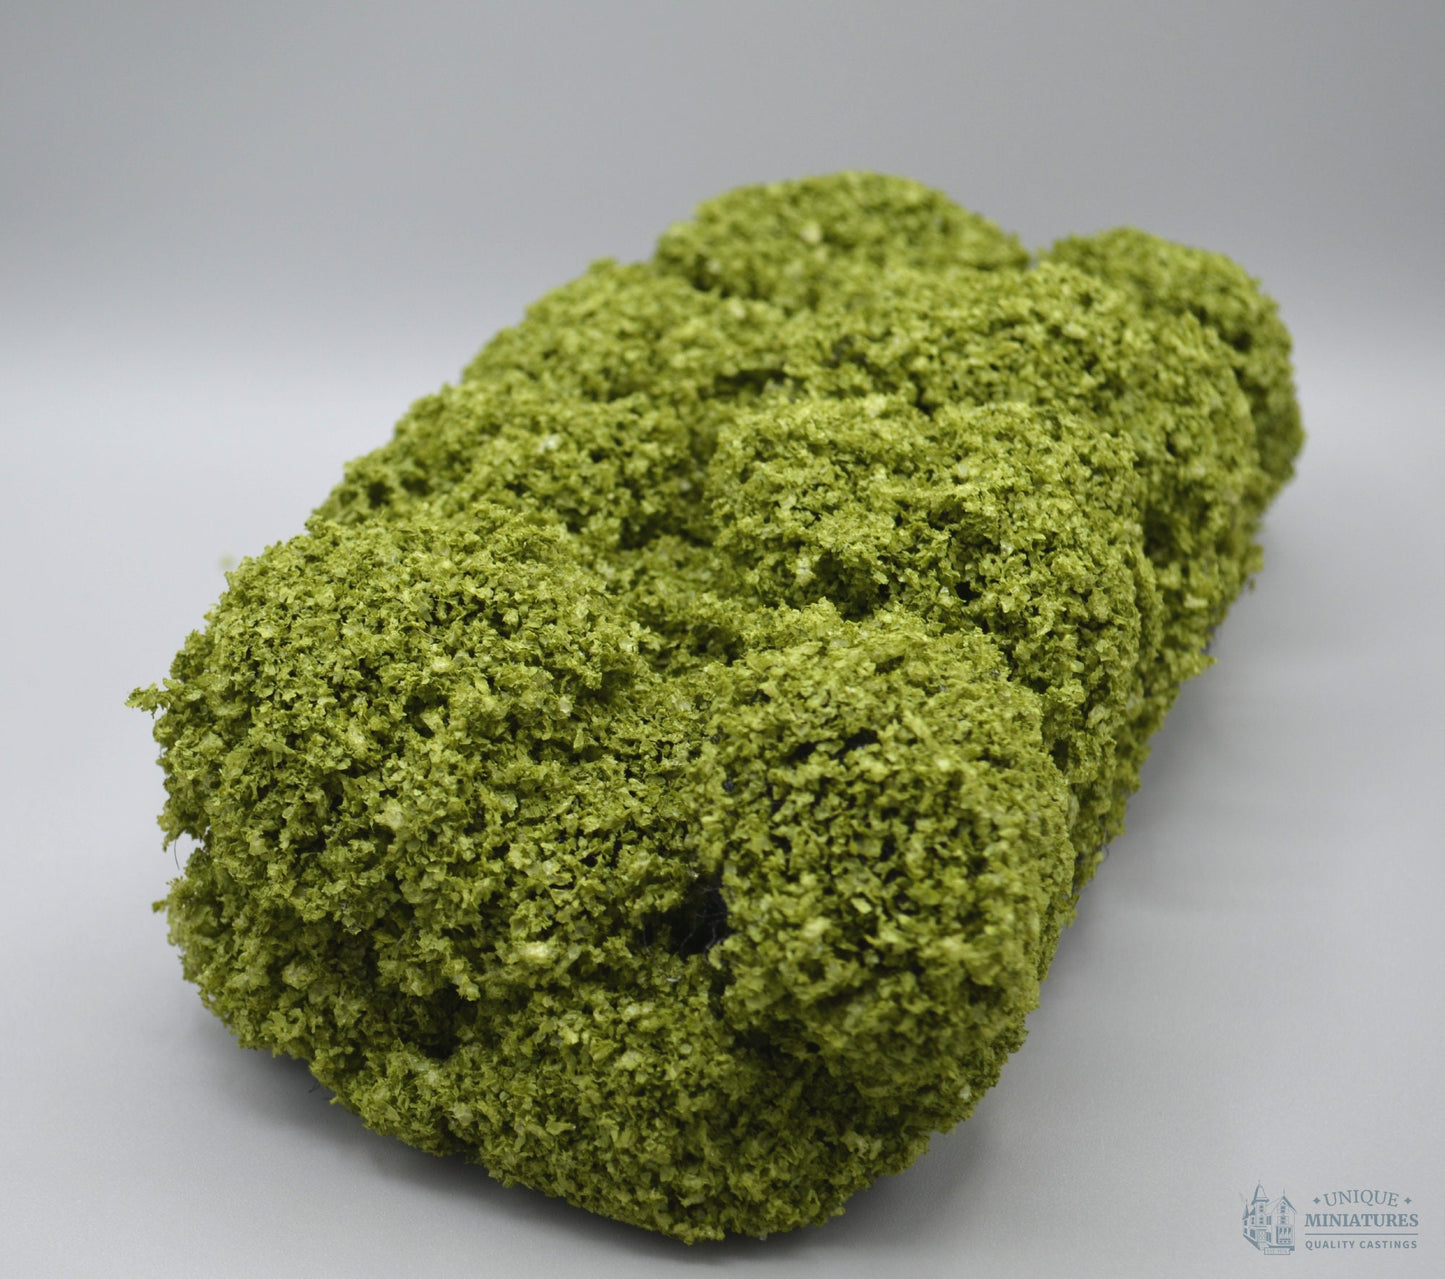 Wild Green Pull-apart Bushes | 9x5 Inches | Miniature for Dollhouse Garden